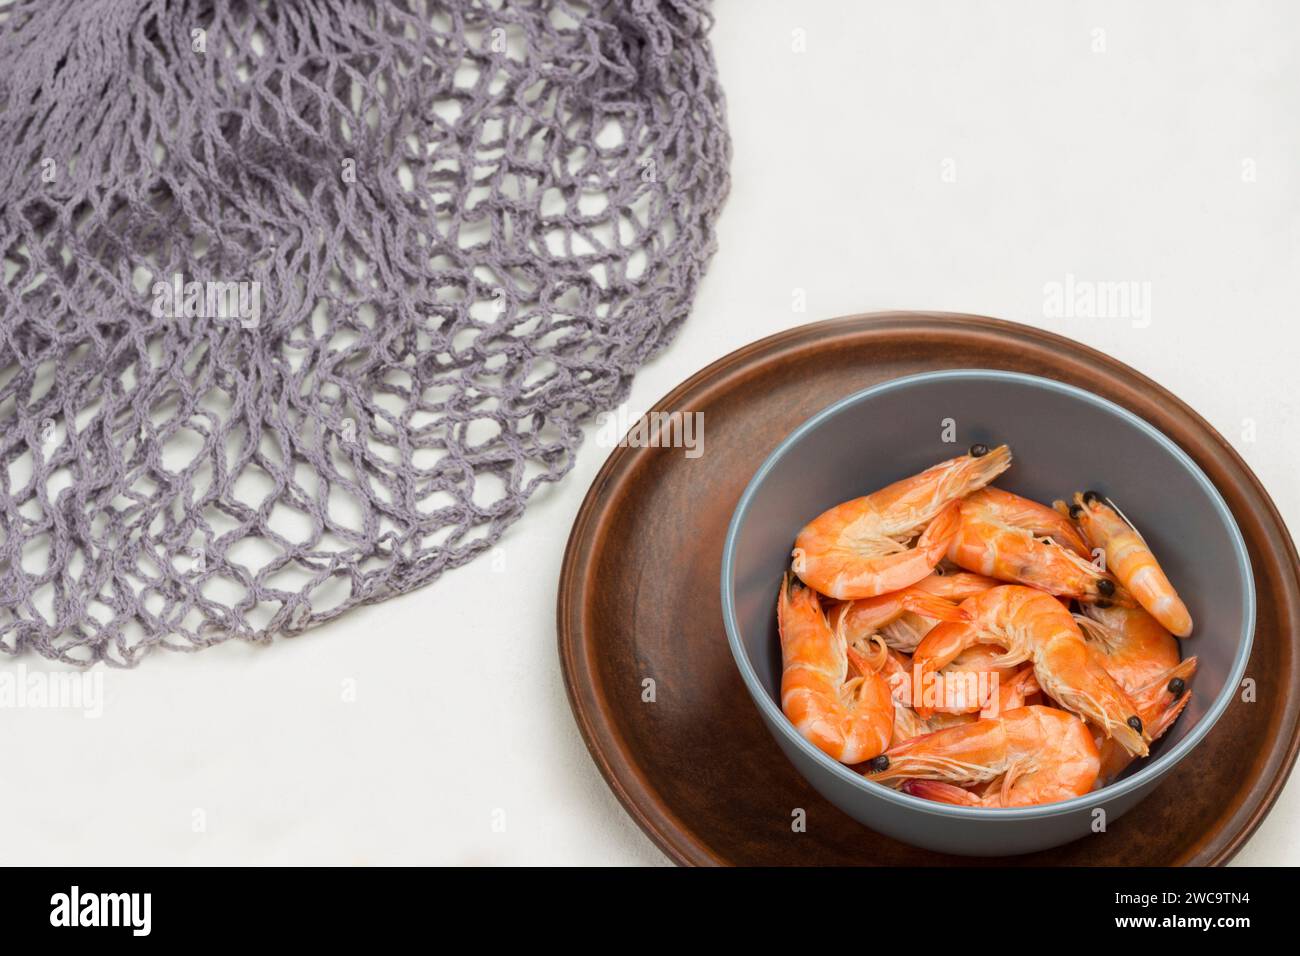 Shrimp in gray bowl. Gray mesh, allspice and lemon on table. White background. Top view Stock Photo